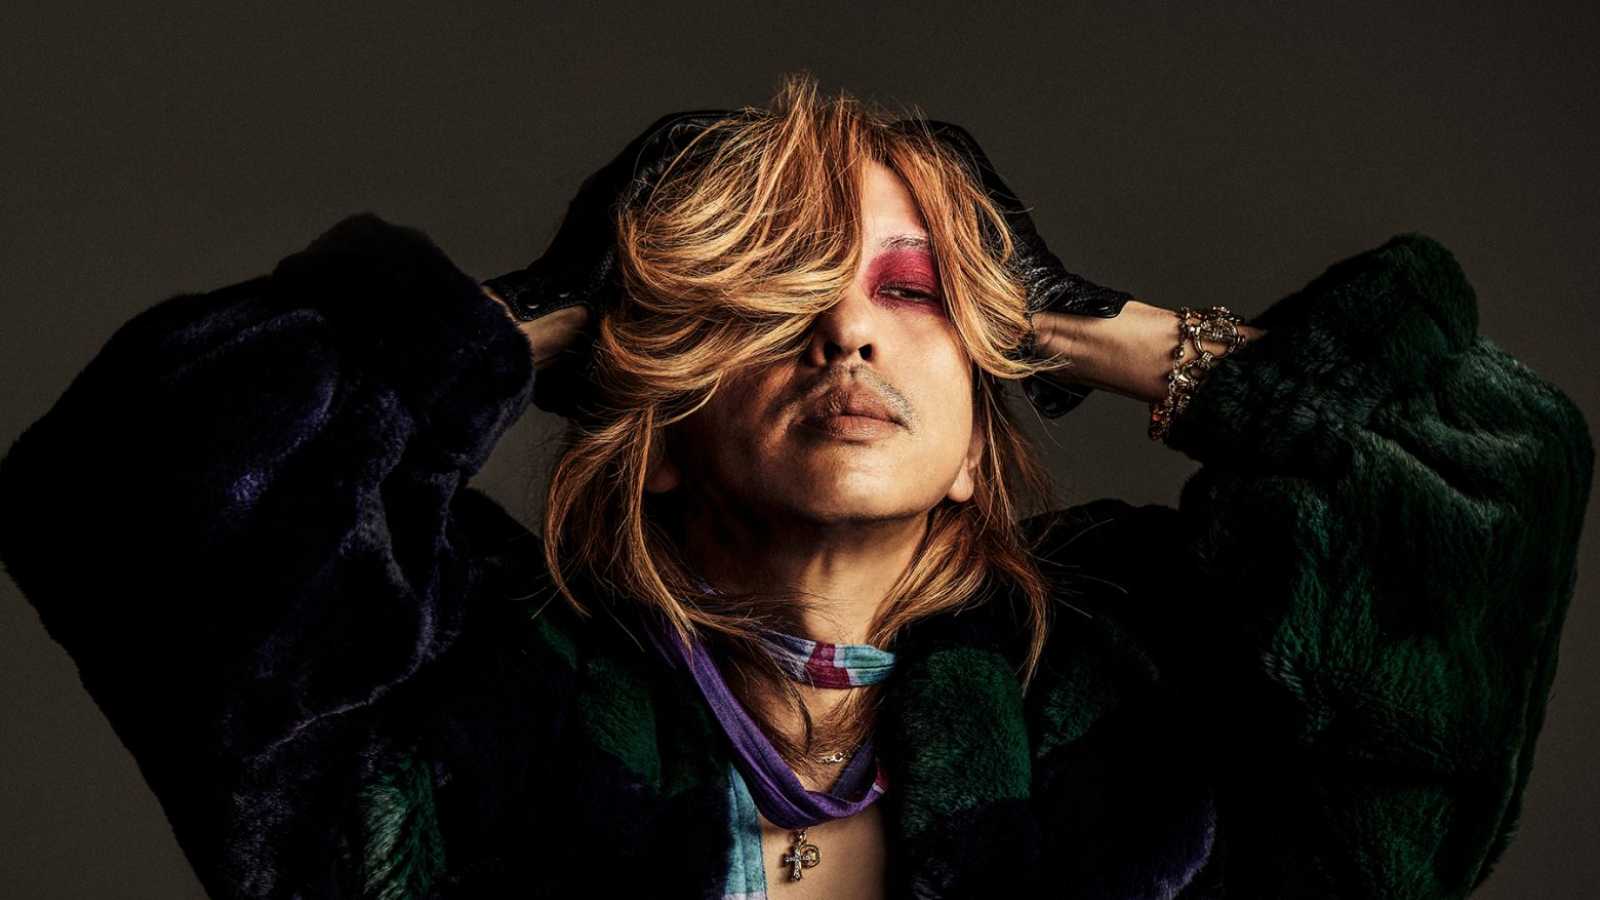 Kiyoharu Unveils "SAINT" Music Video © Loyal Code Artists. All rights reserved.